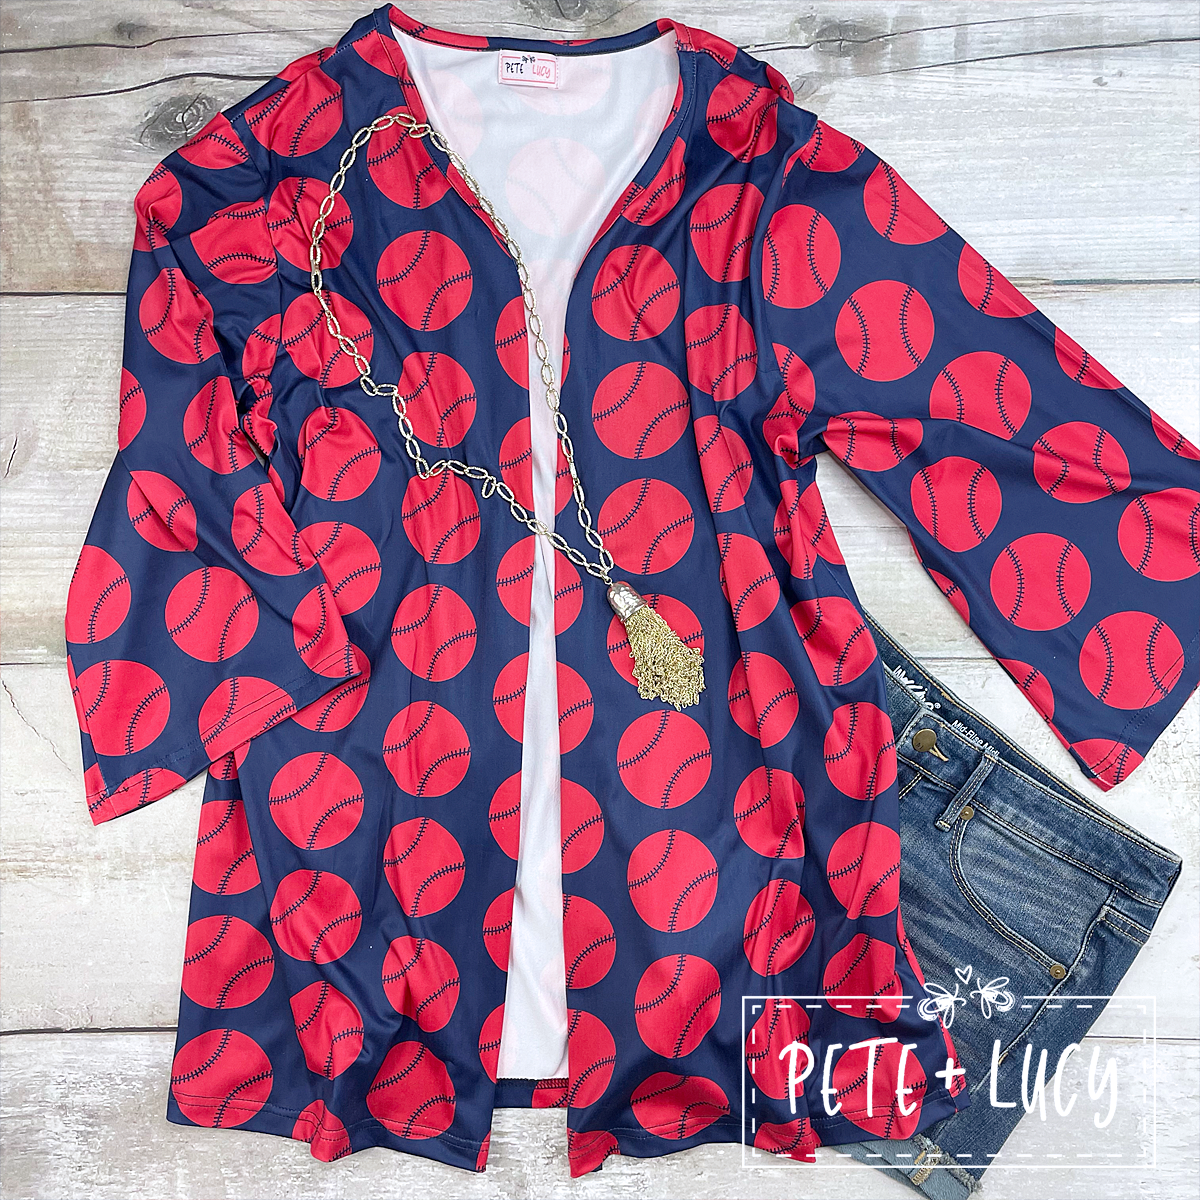 Take Me Out To The Ball Game: Women's Cardigan